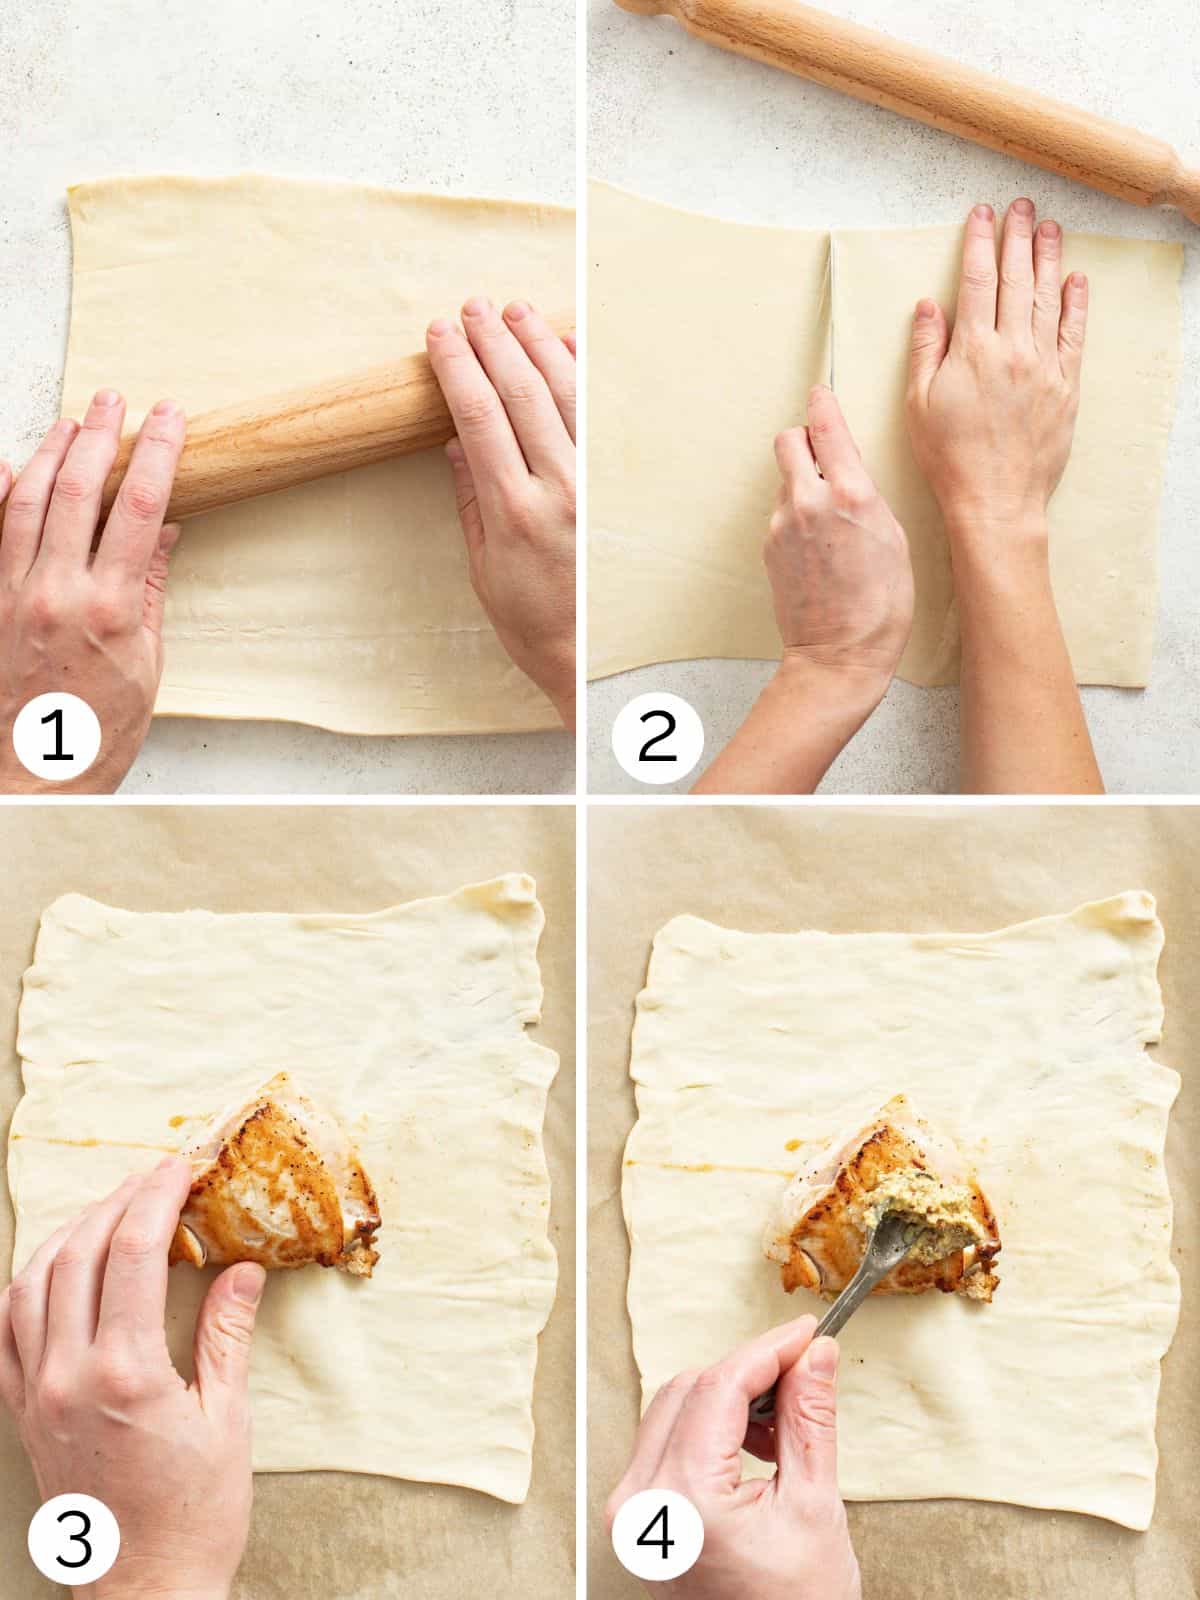 Process photos for how to roll the puff pastry dough and slice it to place the chicken breast on top.